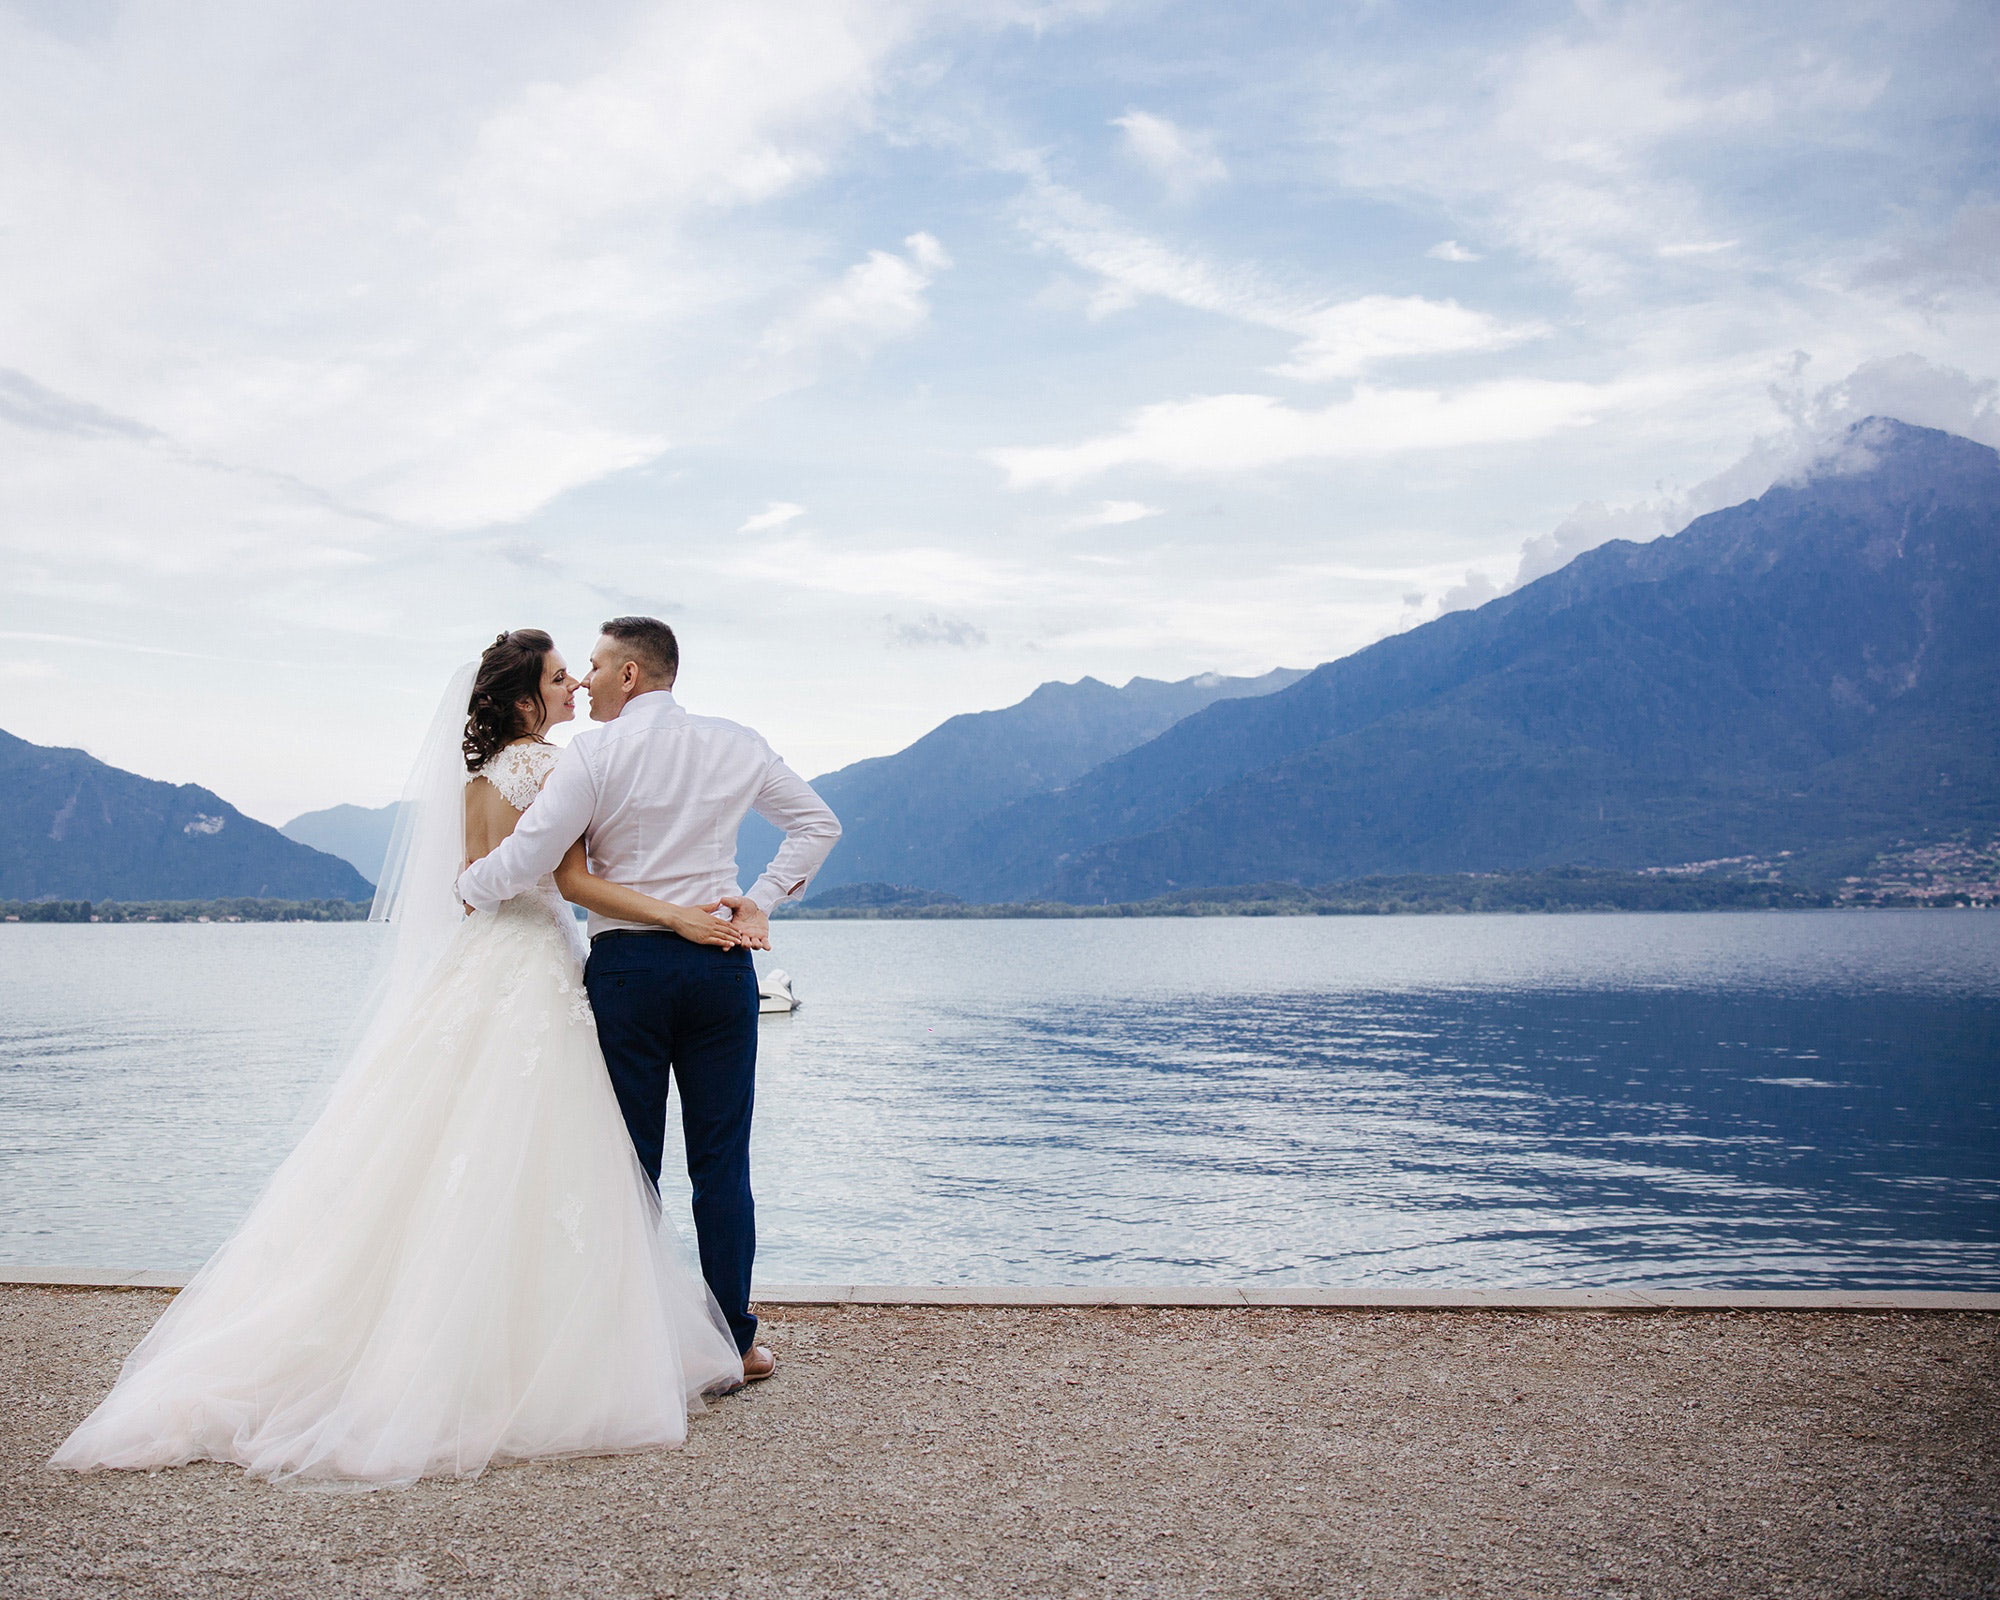 Bride and groom embracing by a lake